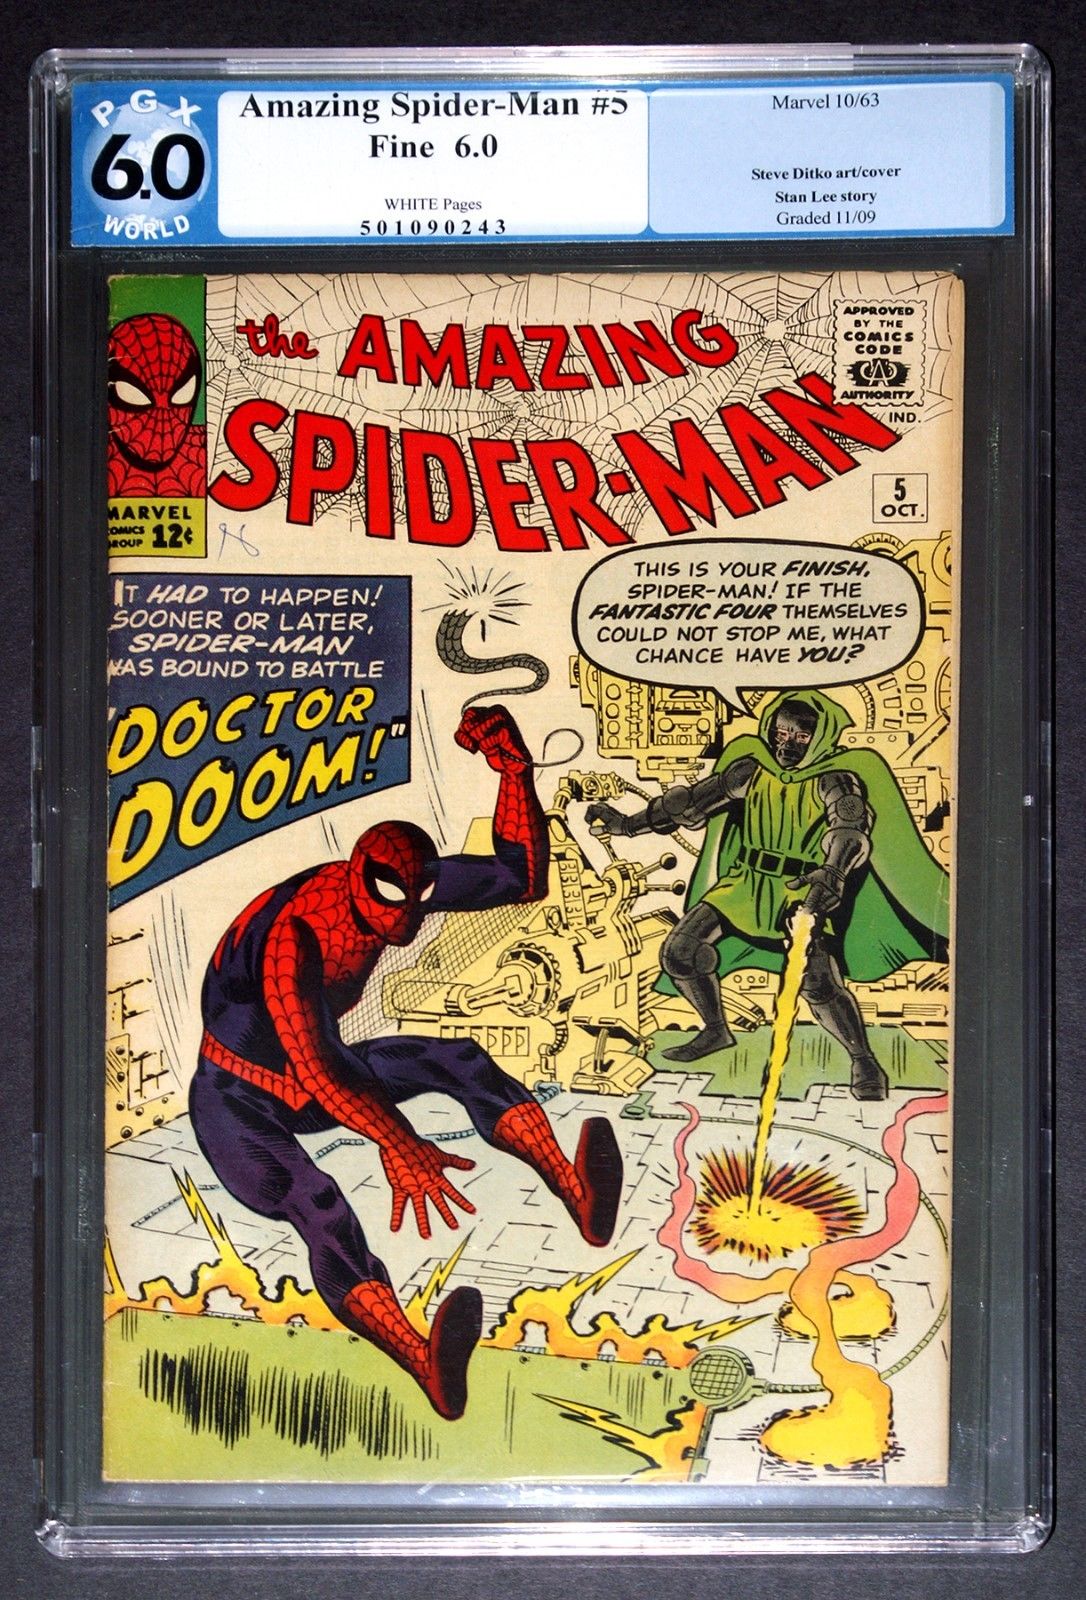 AMAZING SPIDER-MAN #5 - PGX 6.0 - WHITE PAGES - Doctor Doom Marvel Comics 1963